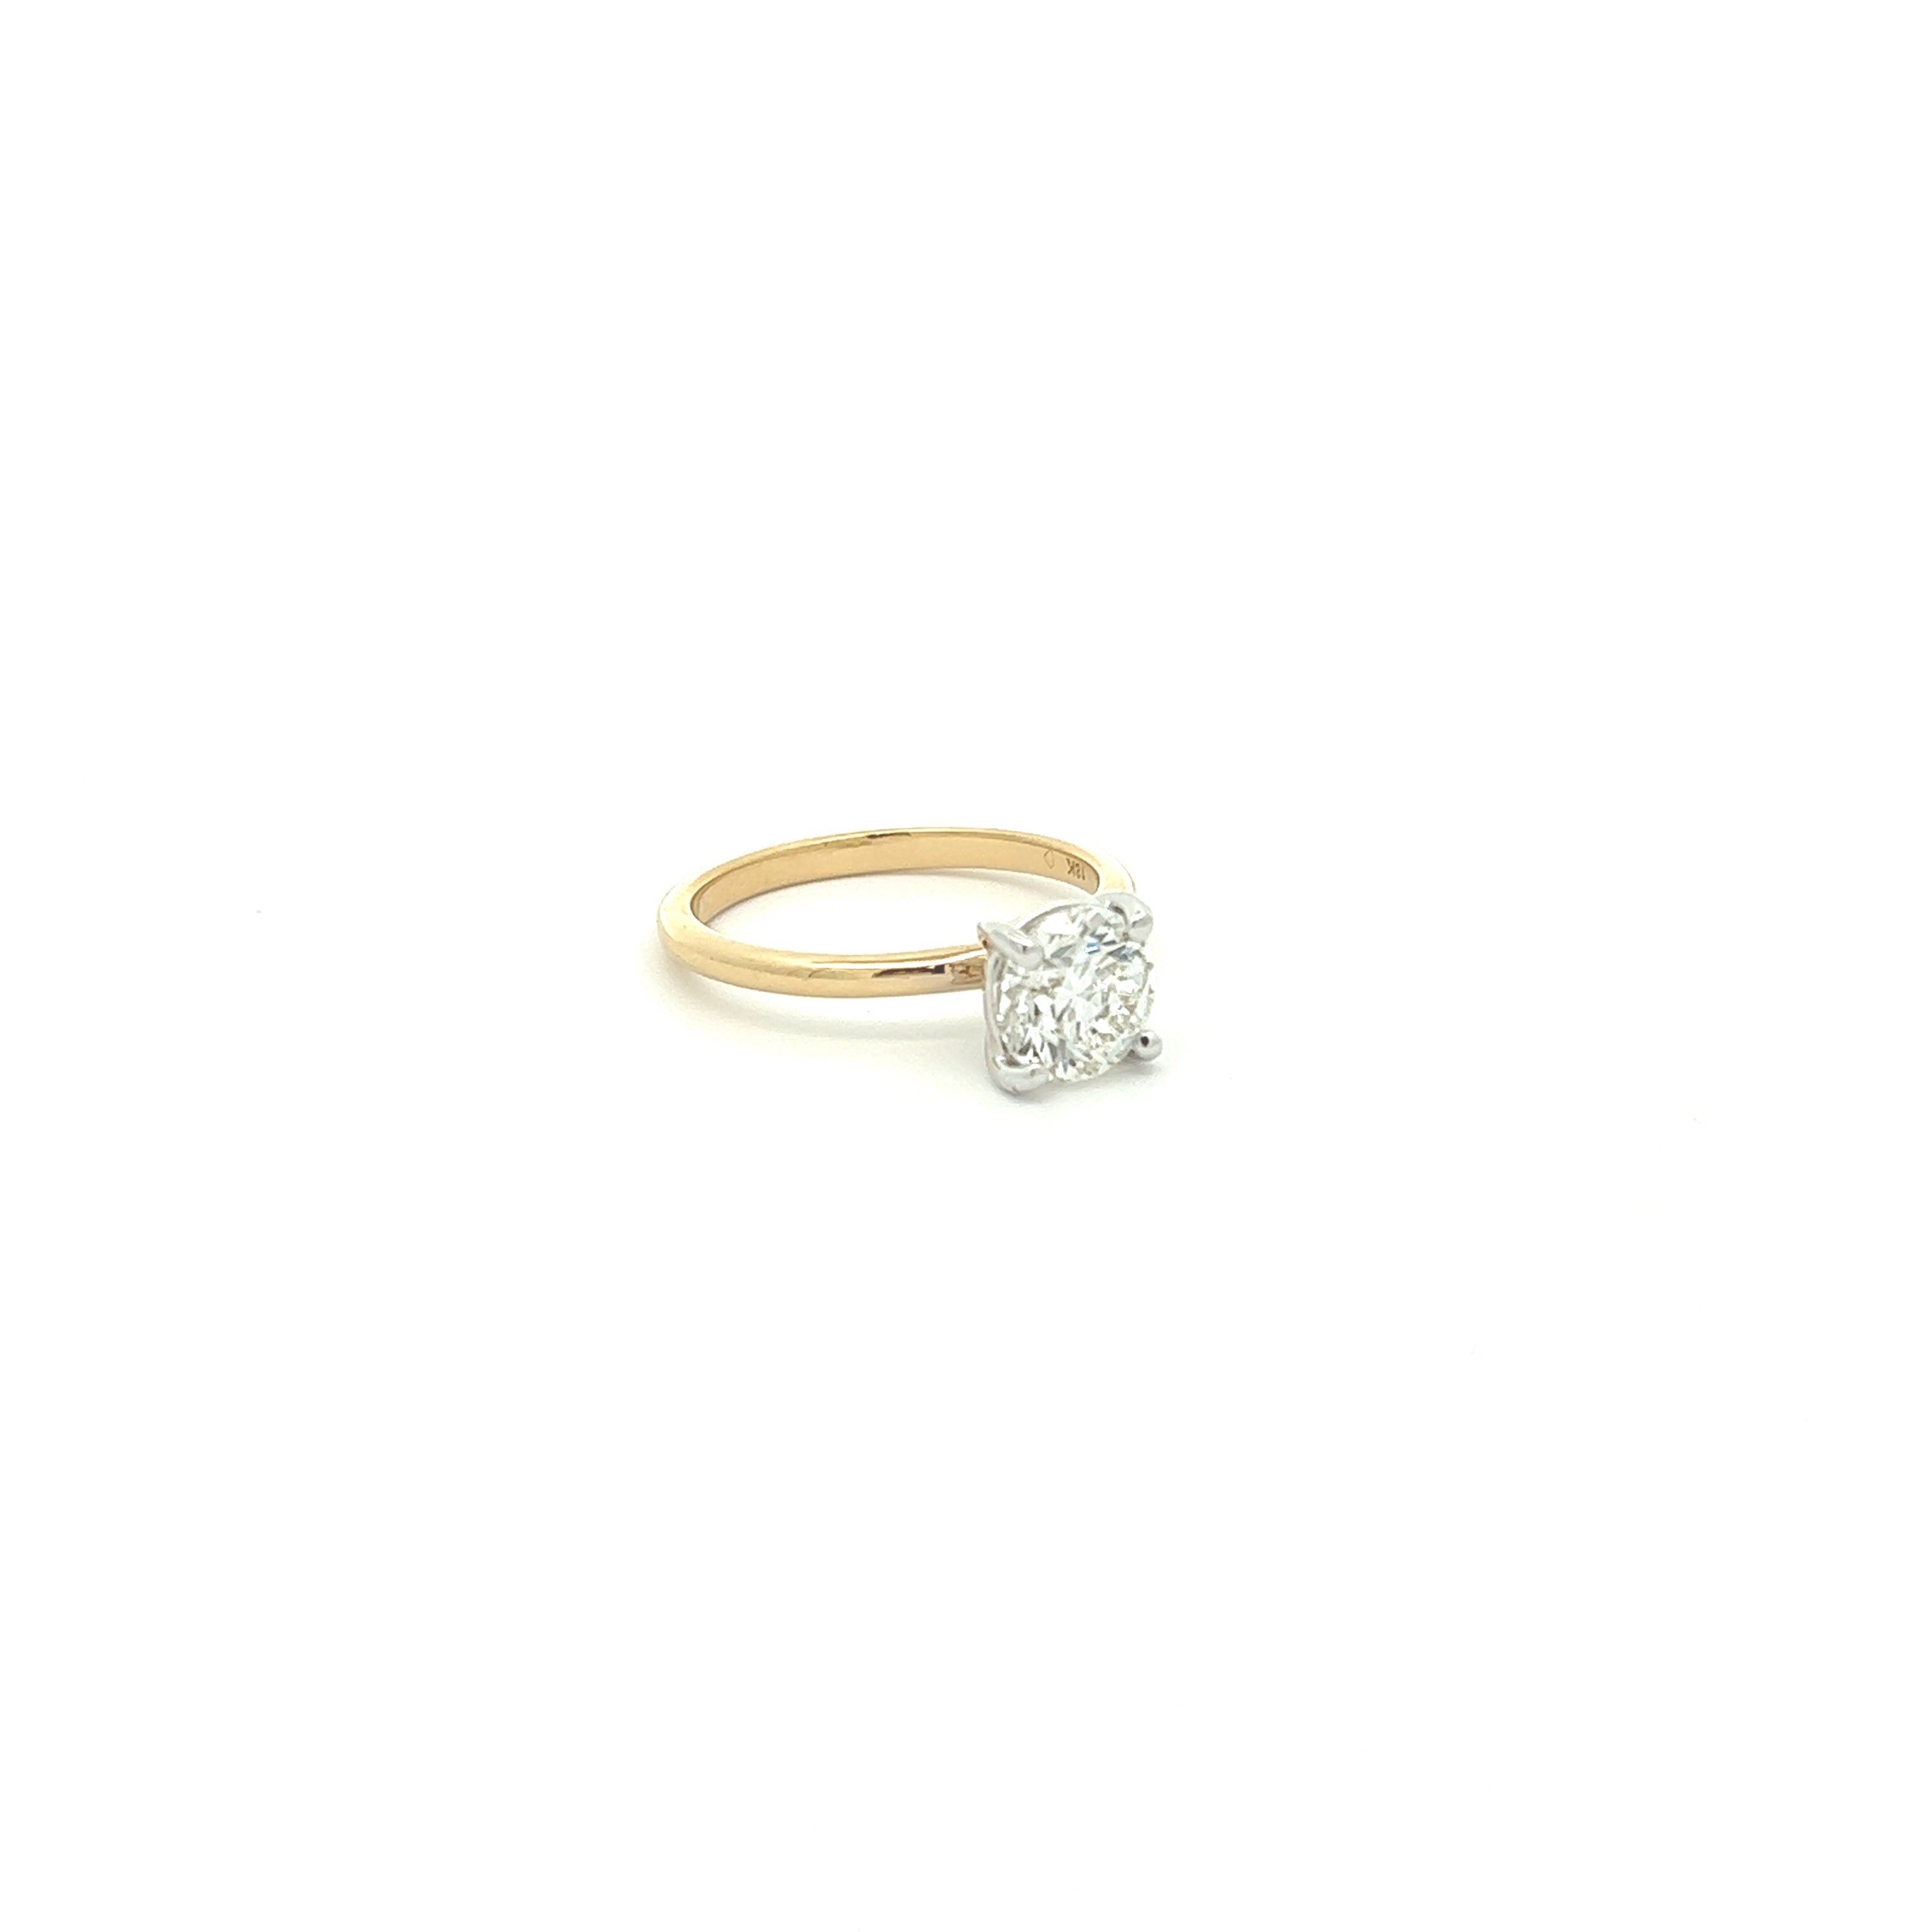 The 1974 18K Yellow Gold Round Engagement Ring